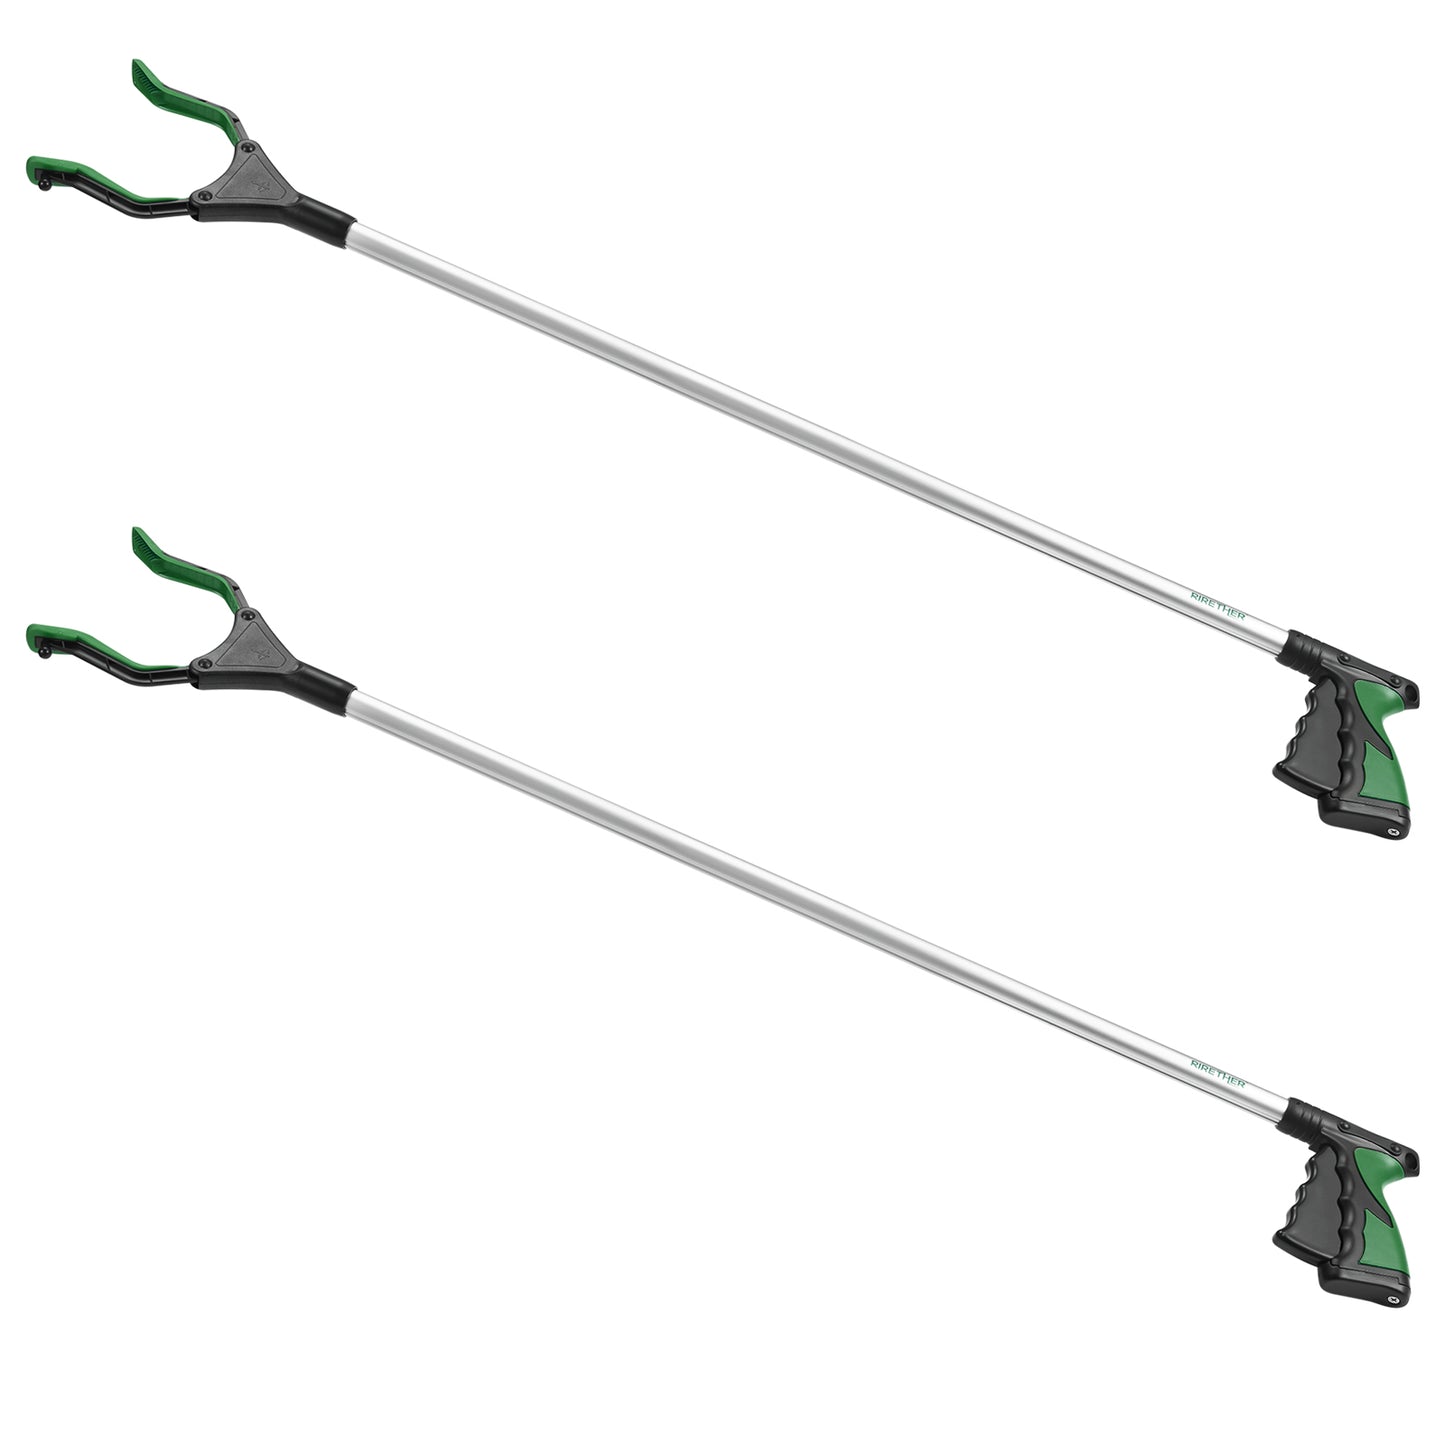 Rirether 2-Pack 36 Inch Grabber Tool for Elderly, Non-Foldable Aluminum Alloy Reacher Grabber with Magnetic Tip and Hook, Rotating Gripper, Wide Jaw Reaching Aid